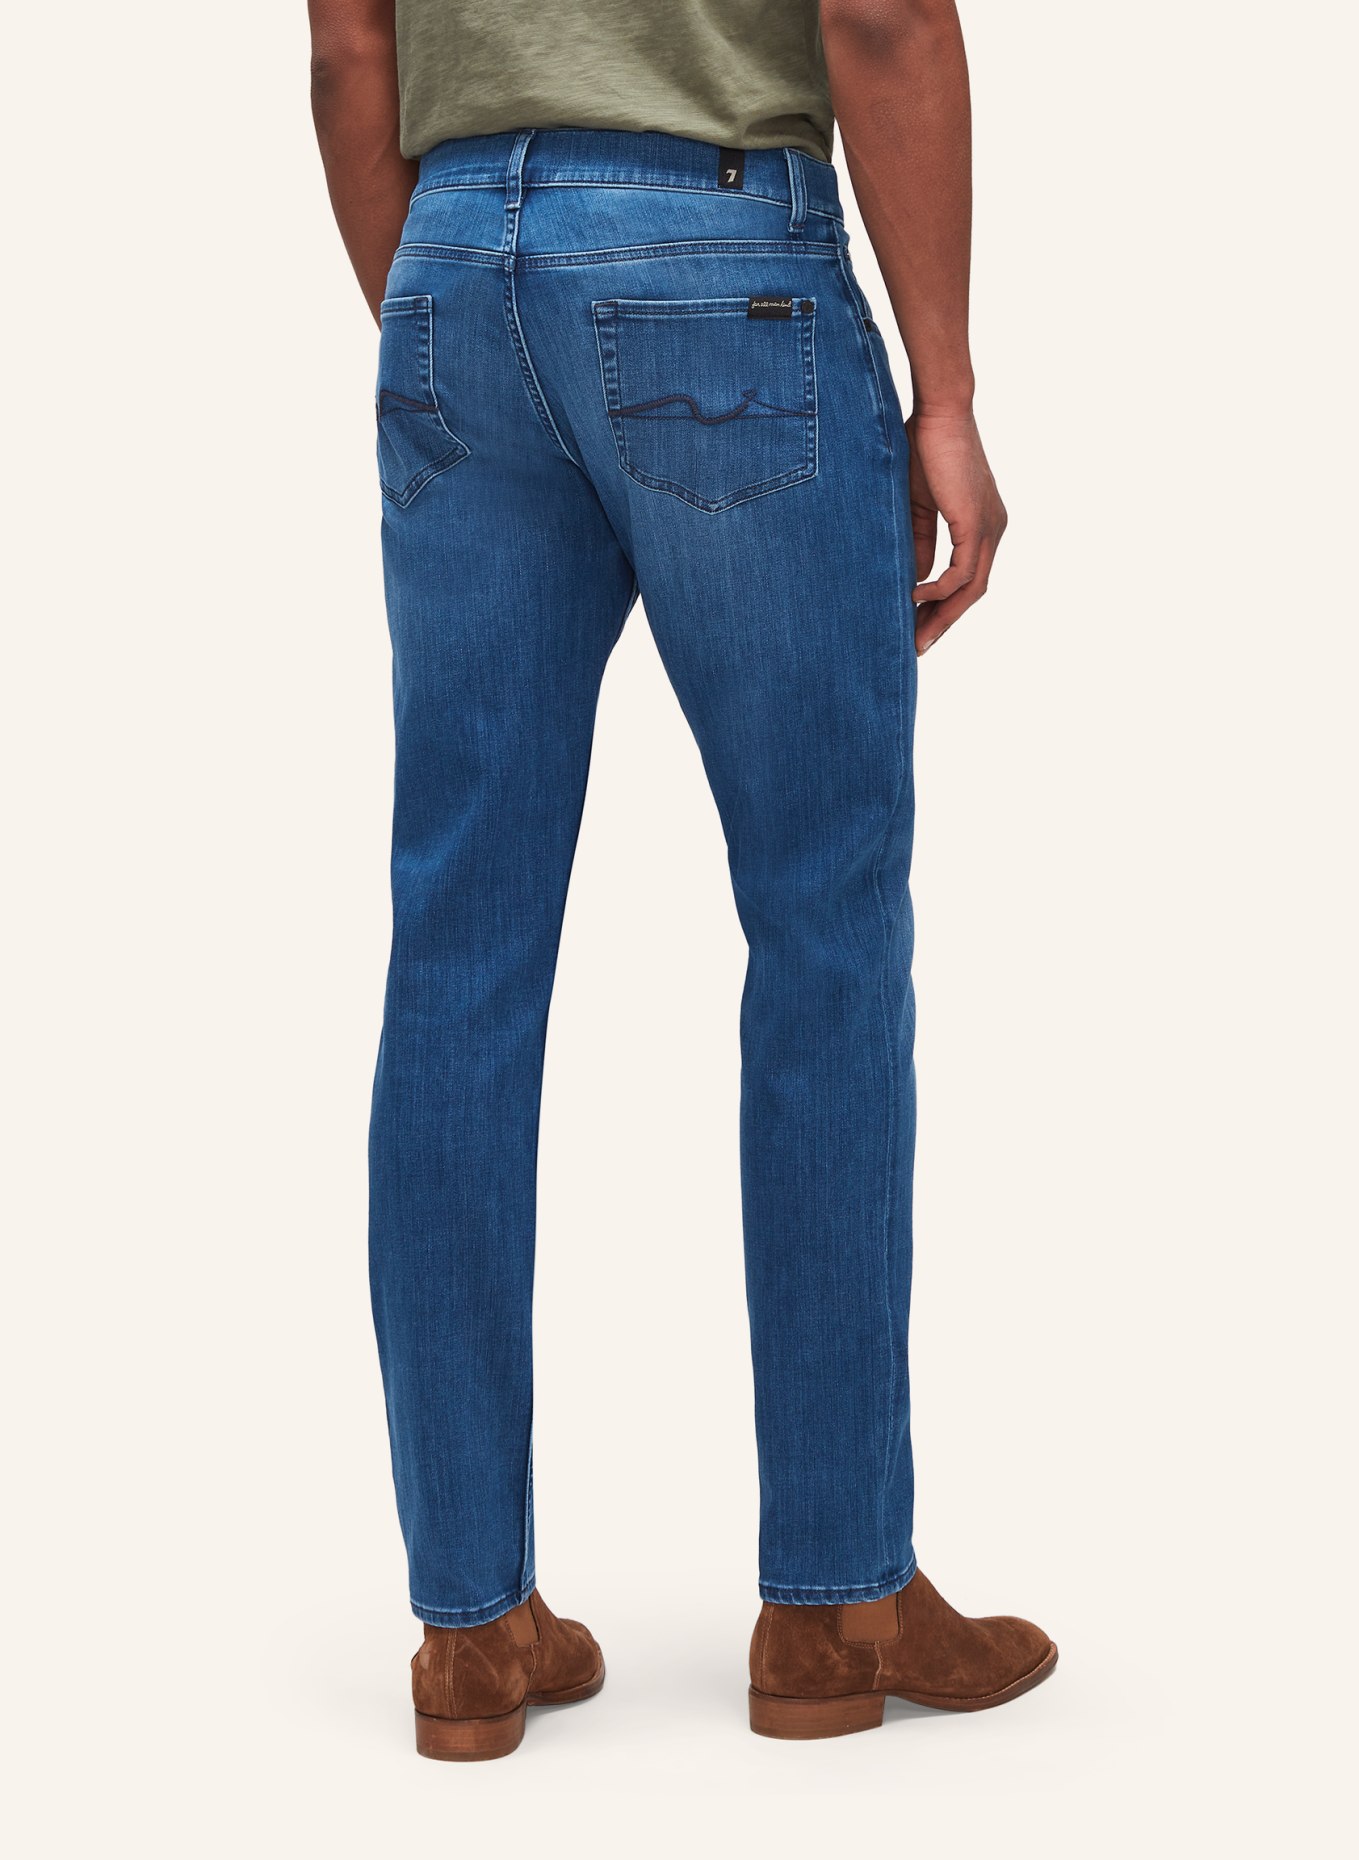 7 for all mankind Jeans SLIMMY TAPERED ECO Slim Fit, Farbe: BLAU (Bild 2)